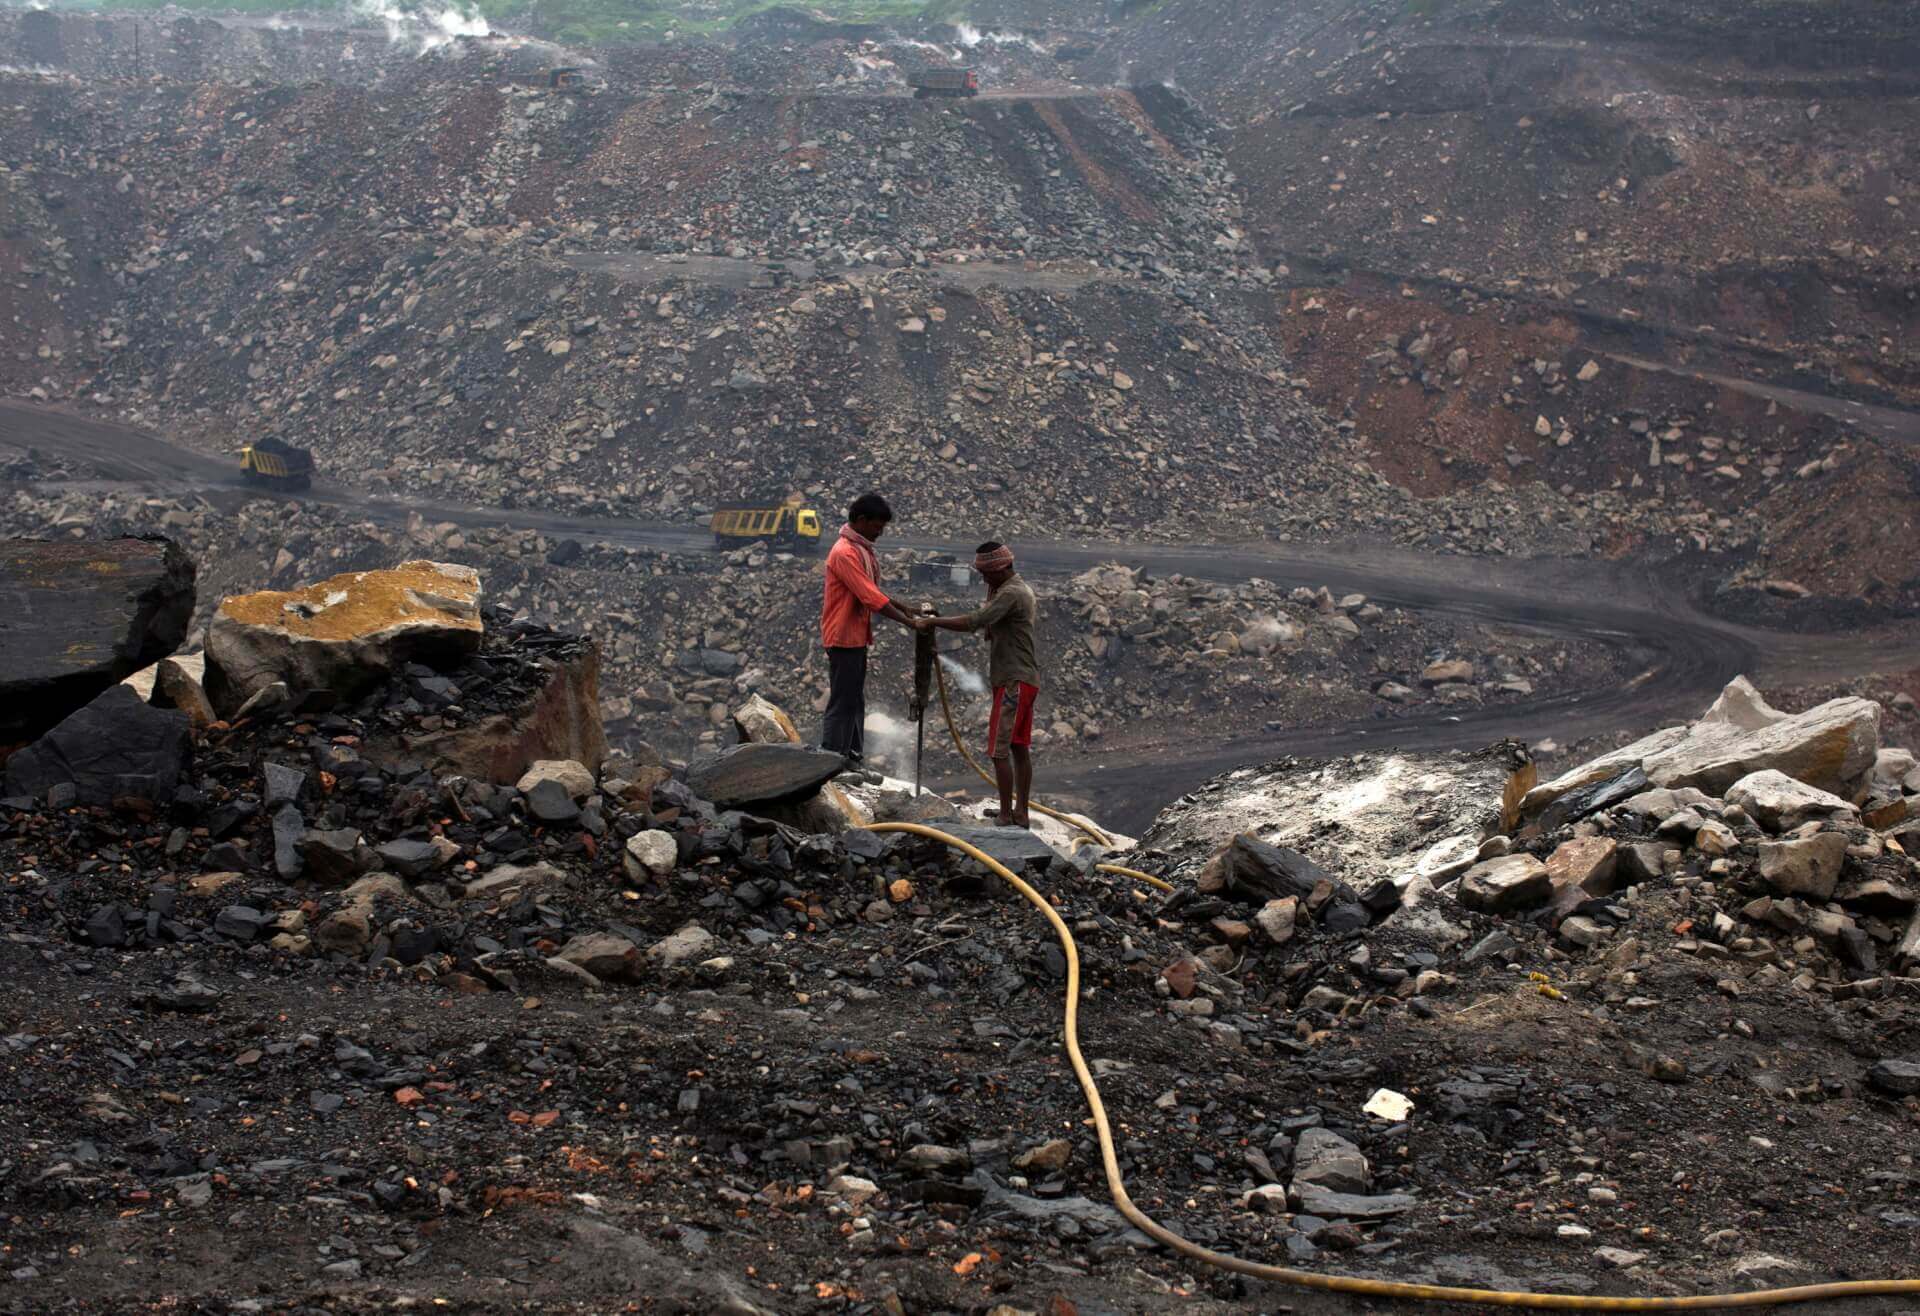 International Energy Agency Raises Concern About India’s Coal Industry